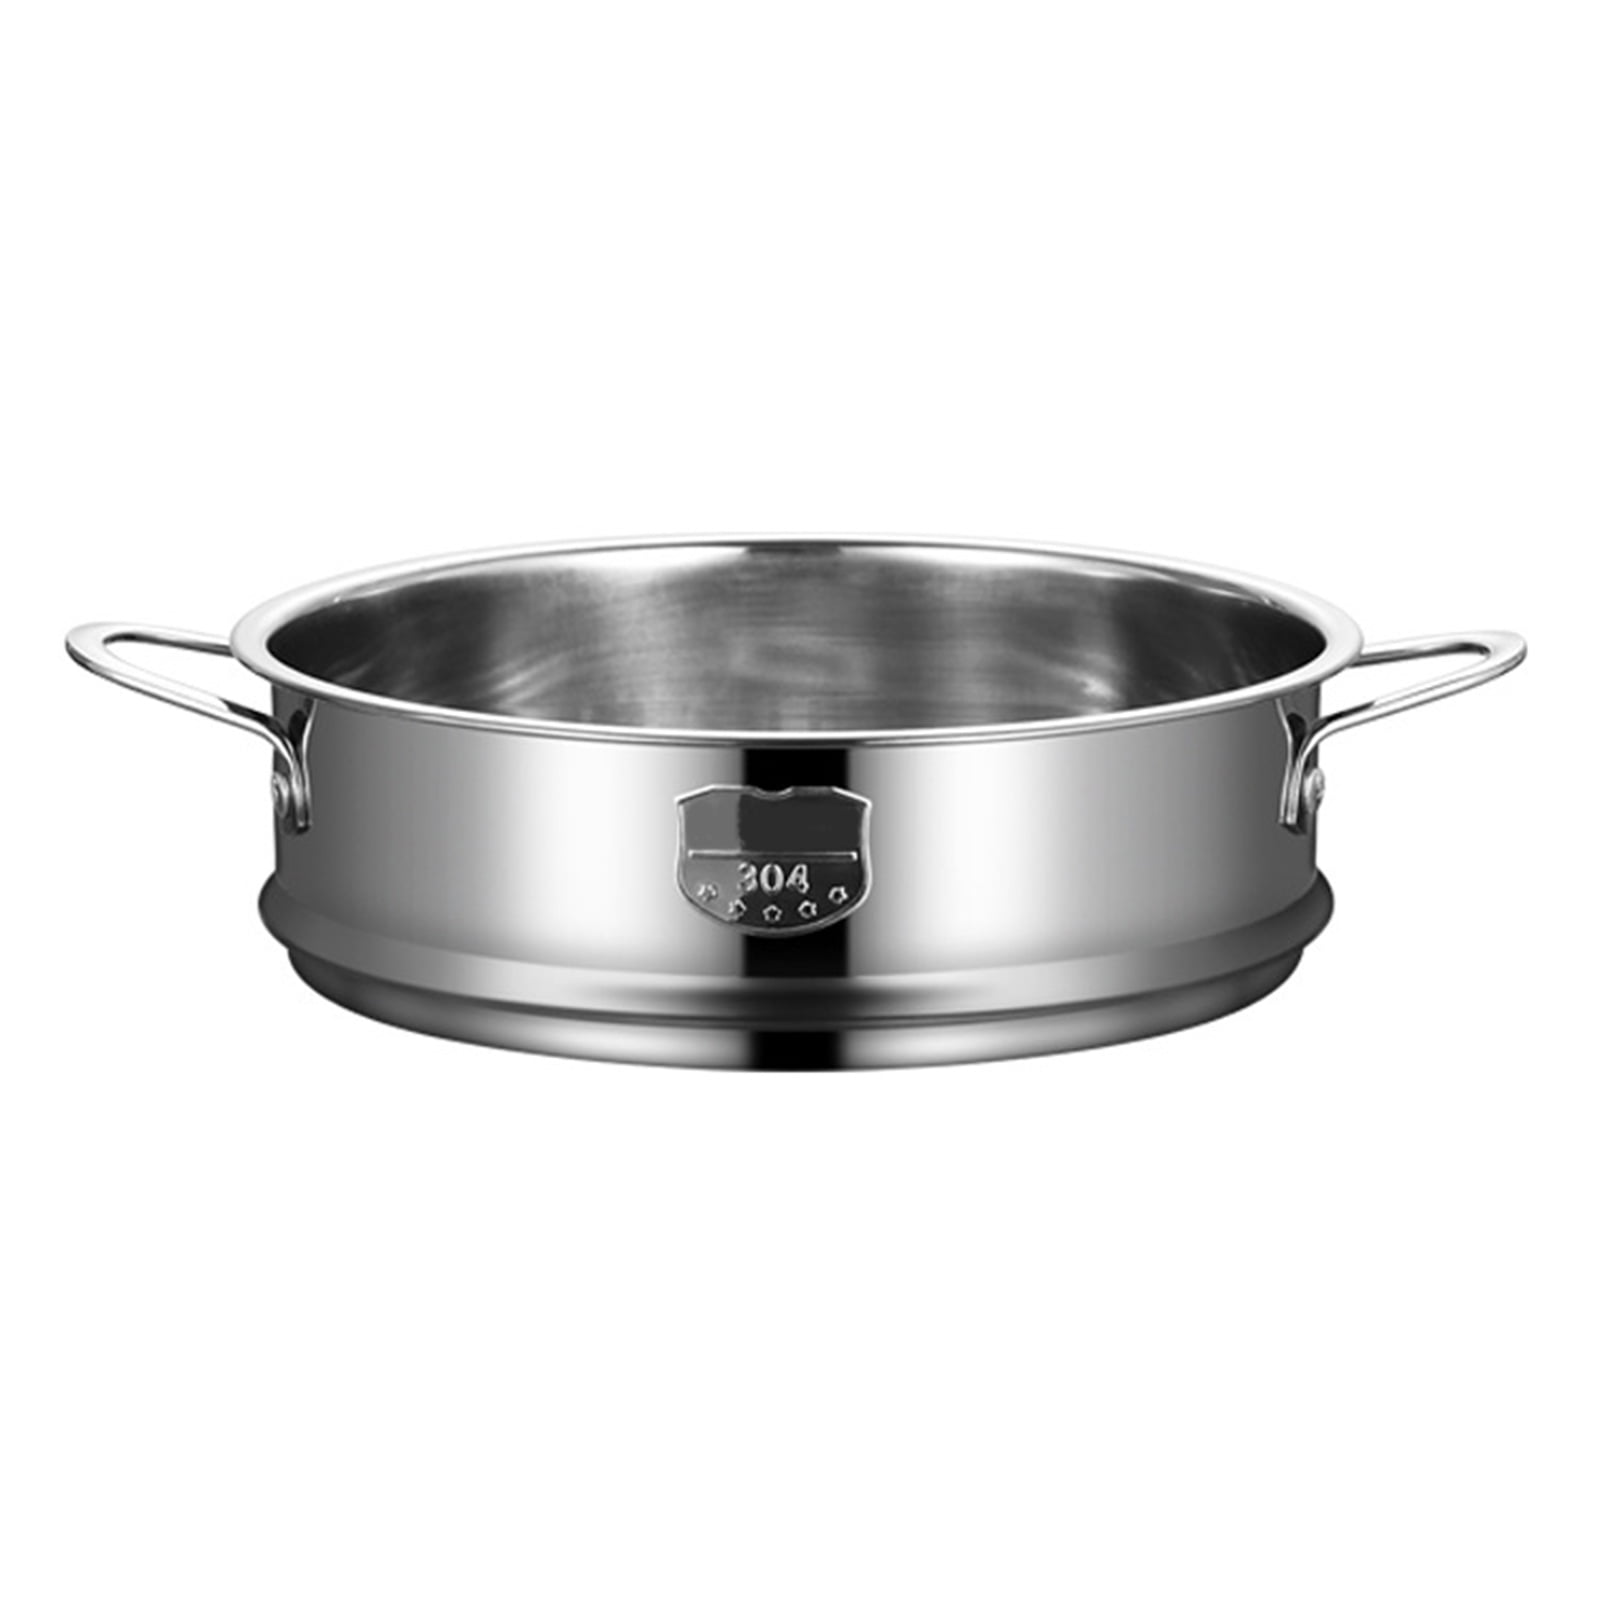 High Quality 304 Stainless Steel Metal Tray 5cm Deep Dish Baking